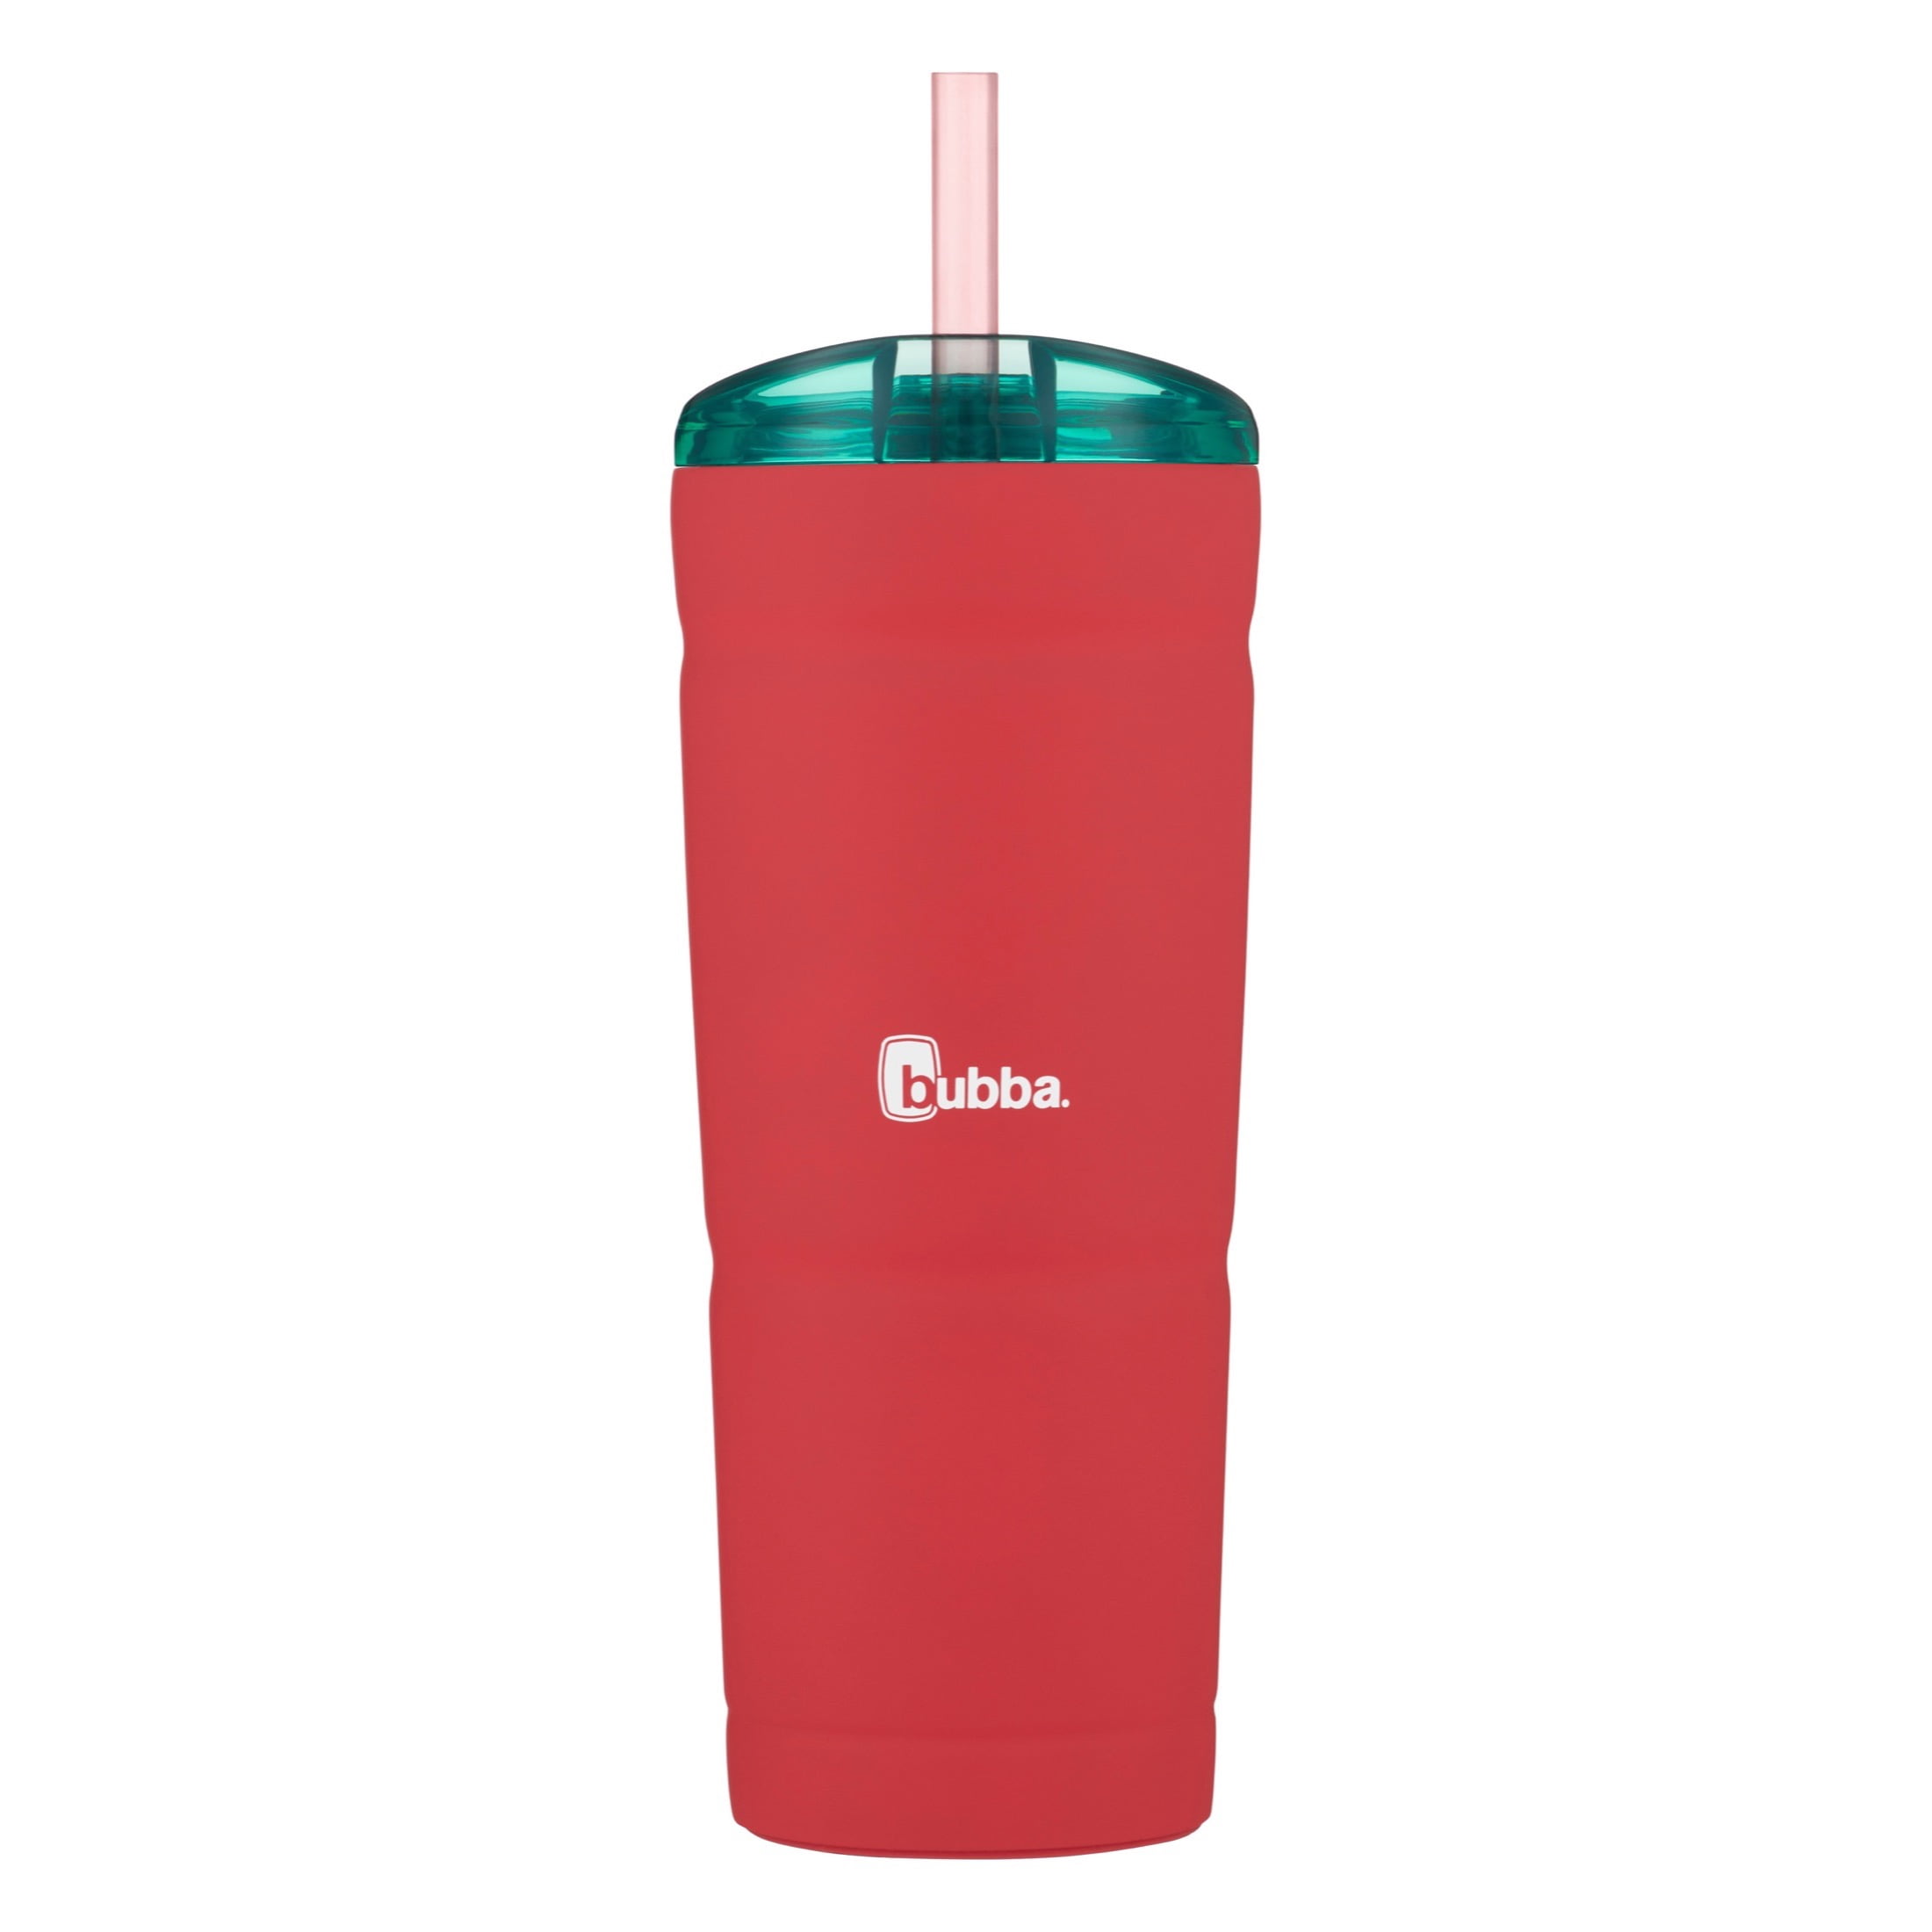 Bubba Insulated 48 oz. Tumbler w/ Handle Red & Blue Abstract Lid and Straw  as is